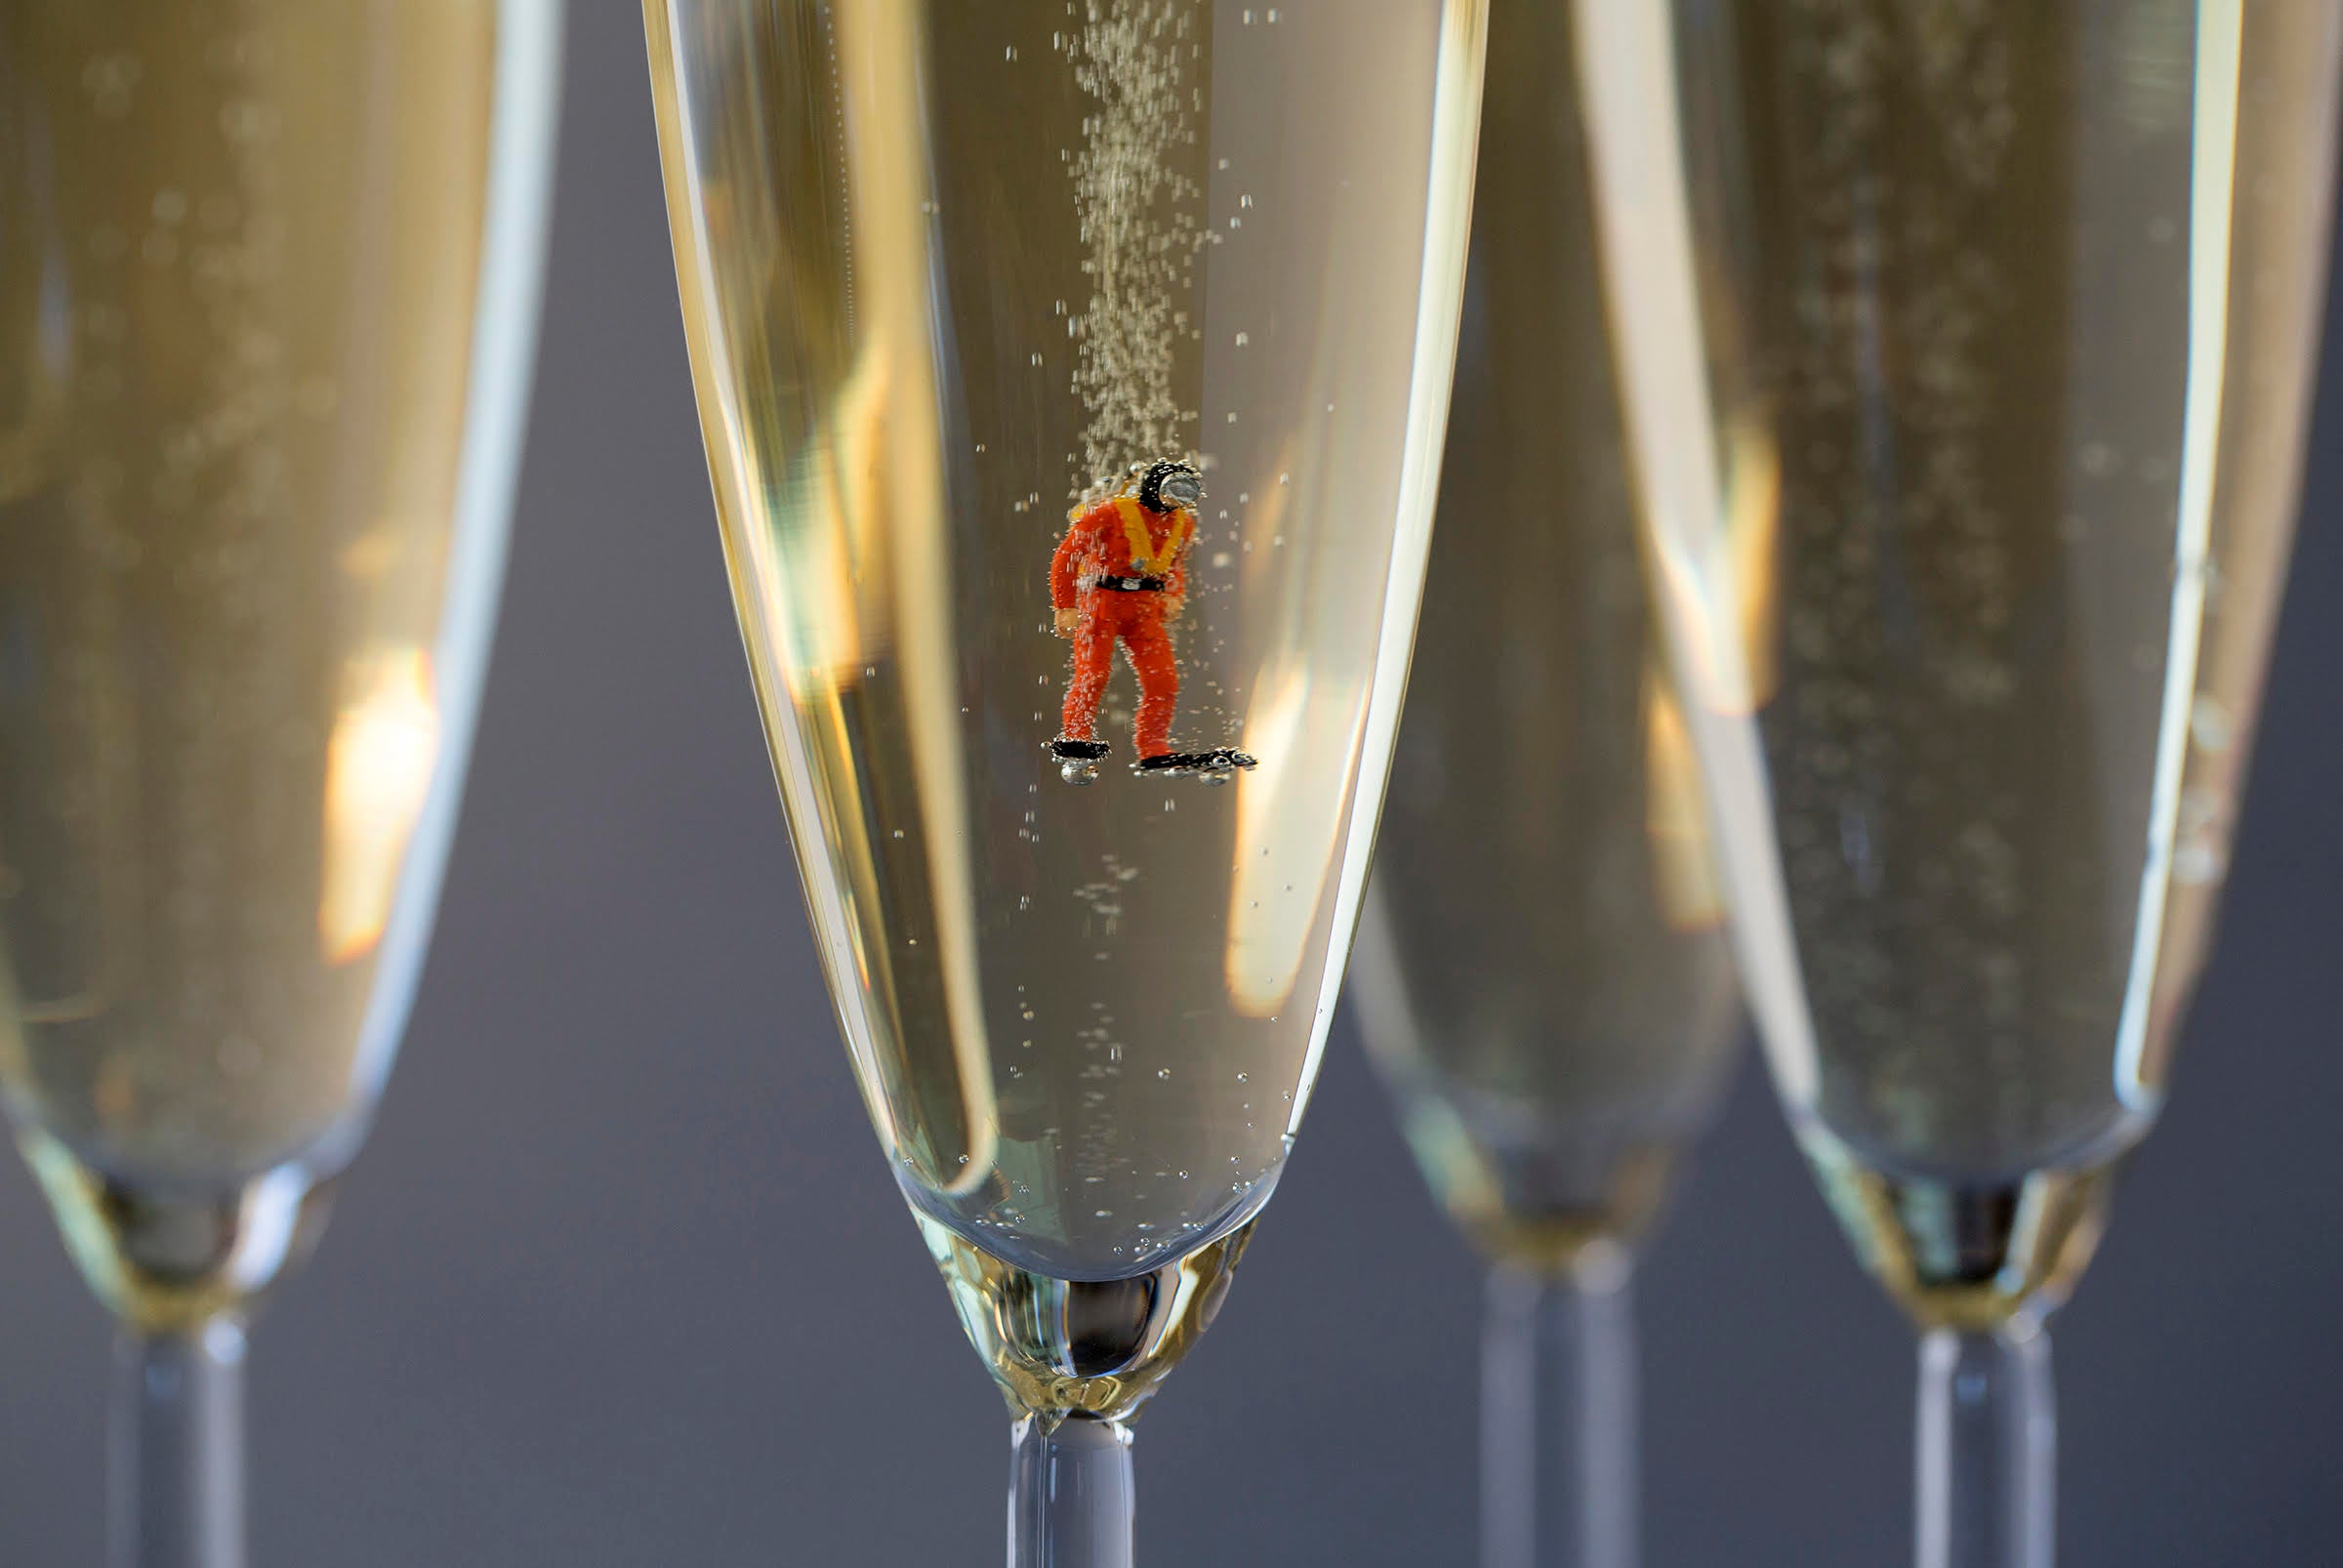 A small scuba diver figure in a red suit, black helmet, and flippers floats in a flute of champagne, photographed as a close-up.